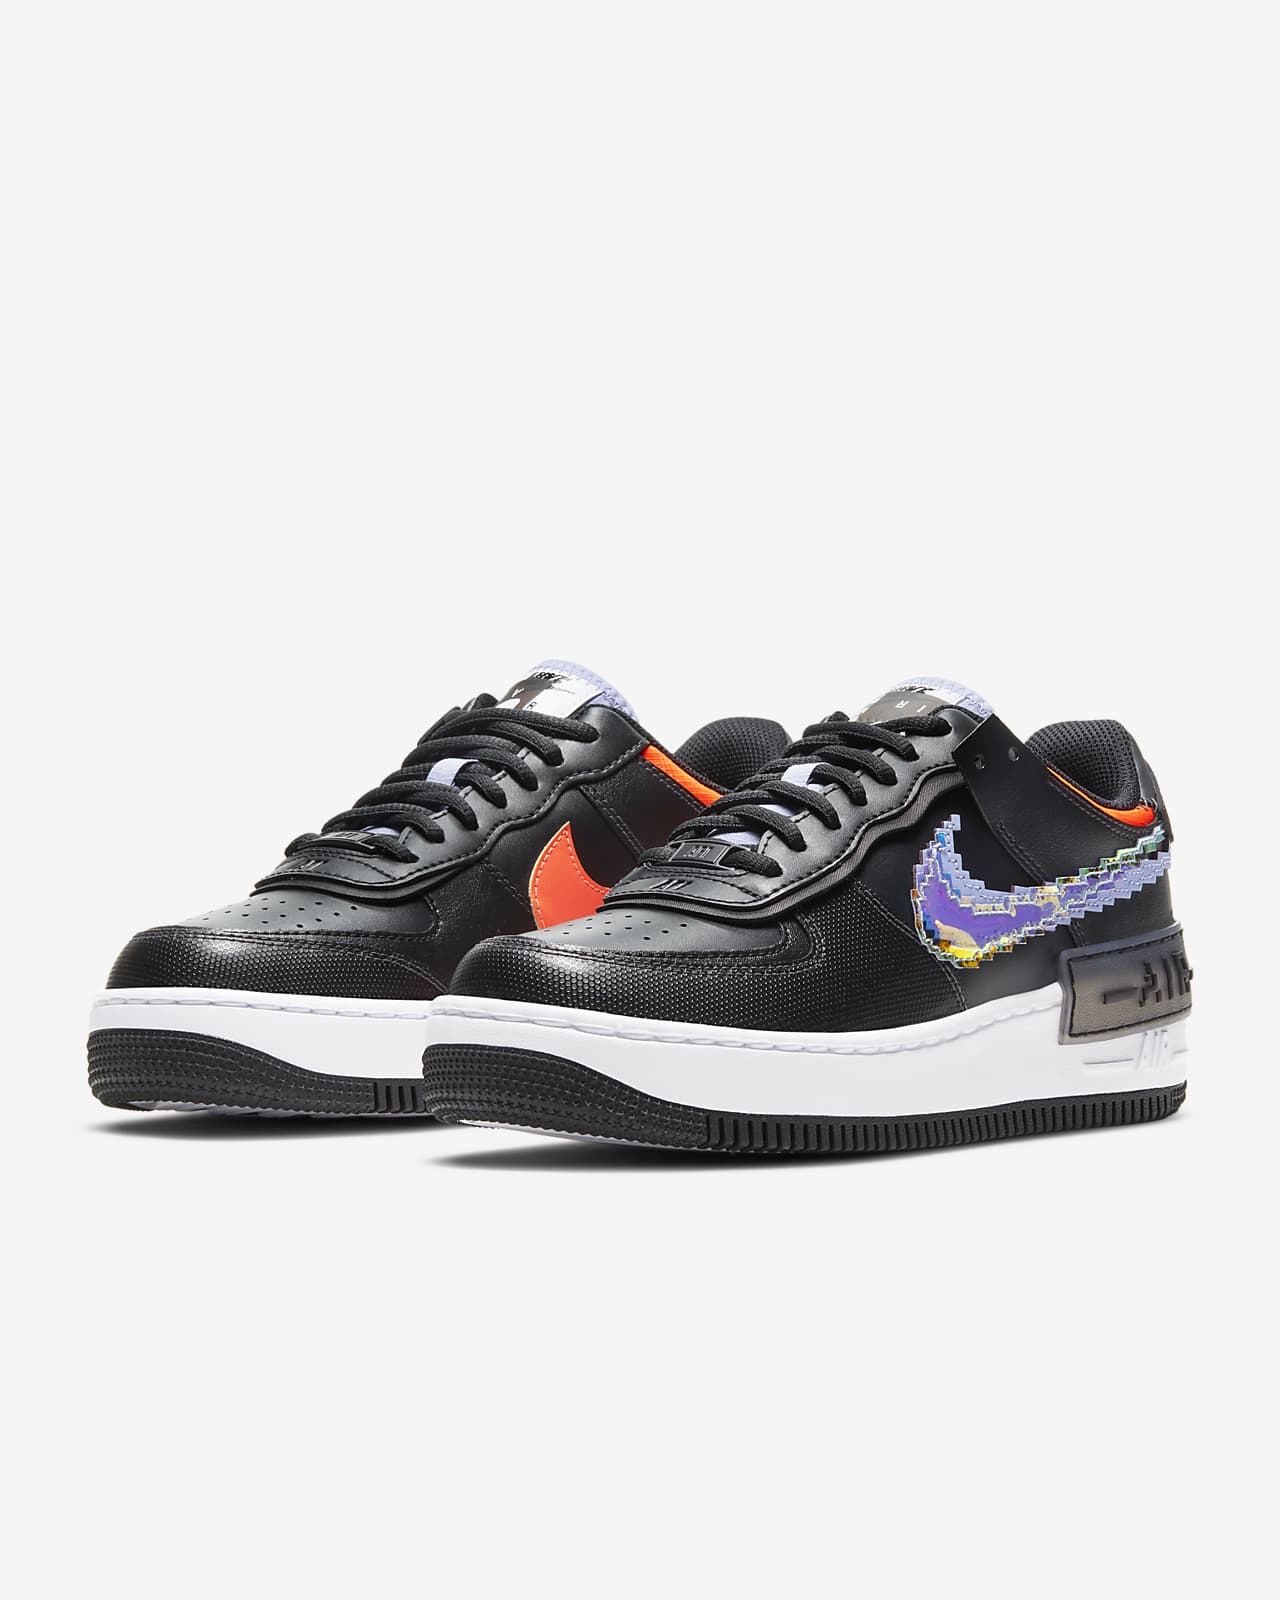 the nike air force 1 shadow